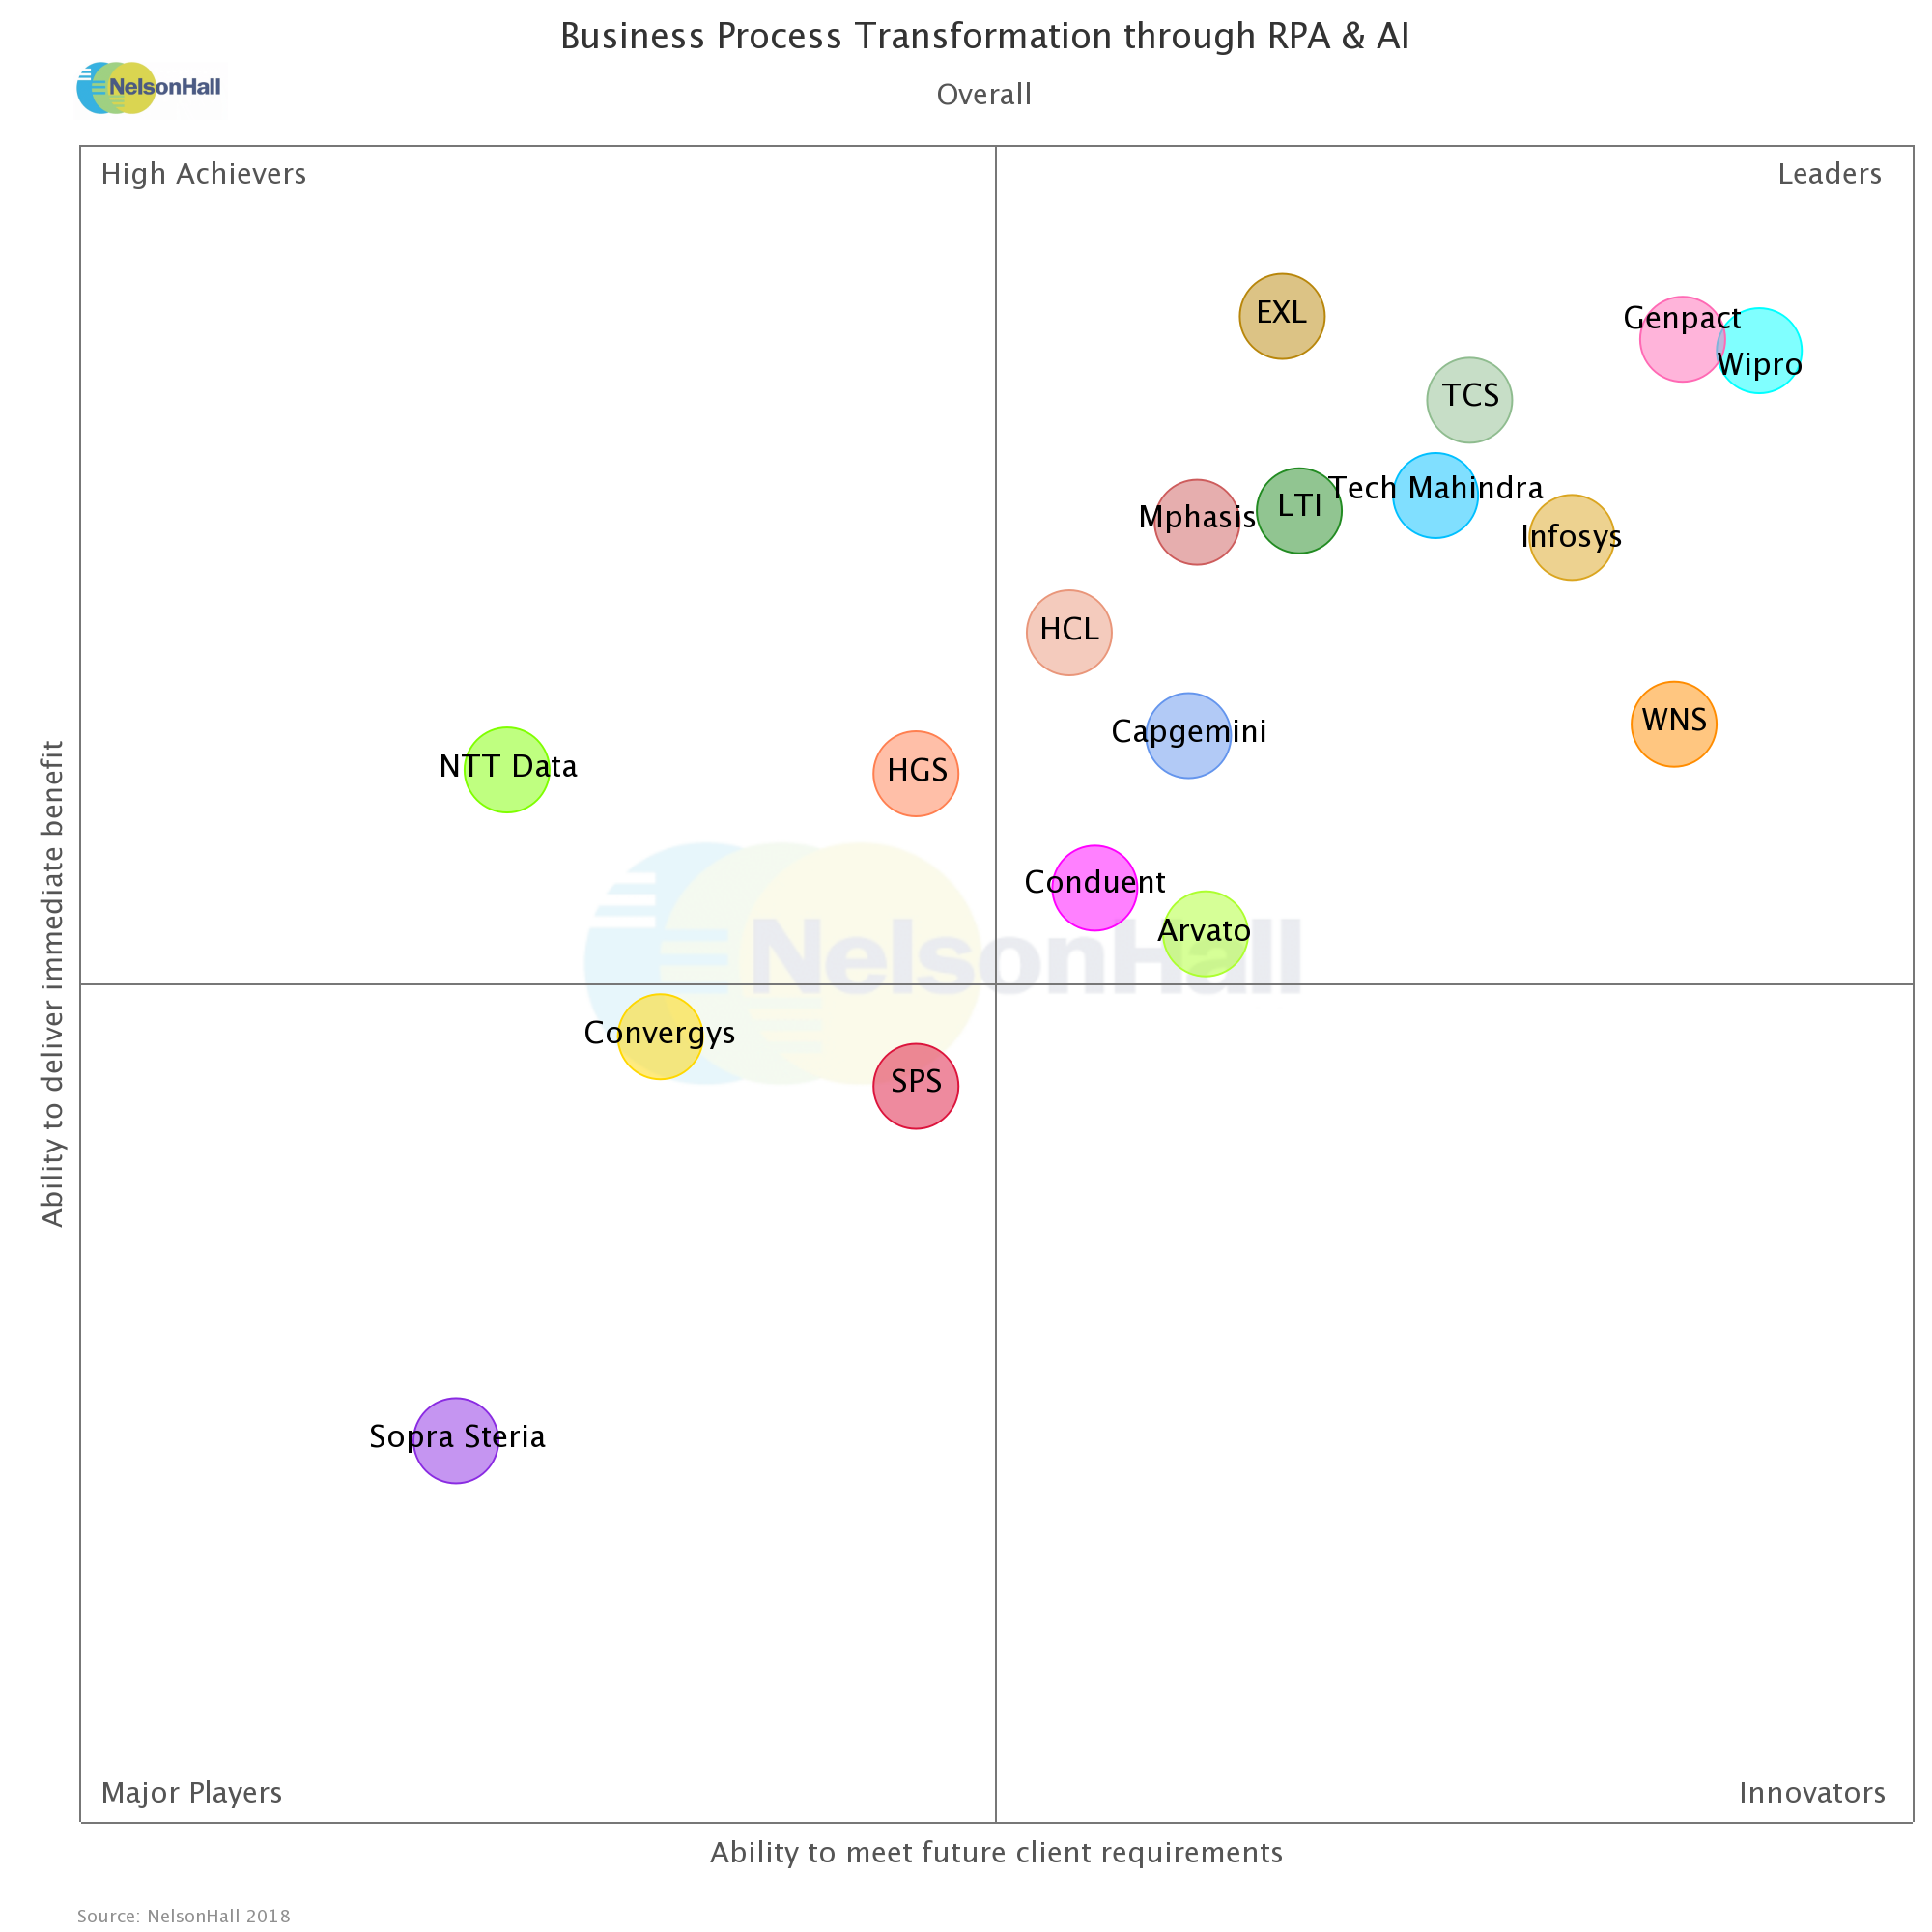 NelsonHall ranks Wipro #1 for Business Process Transformation through RPA & AI